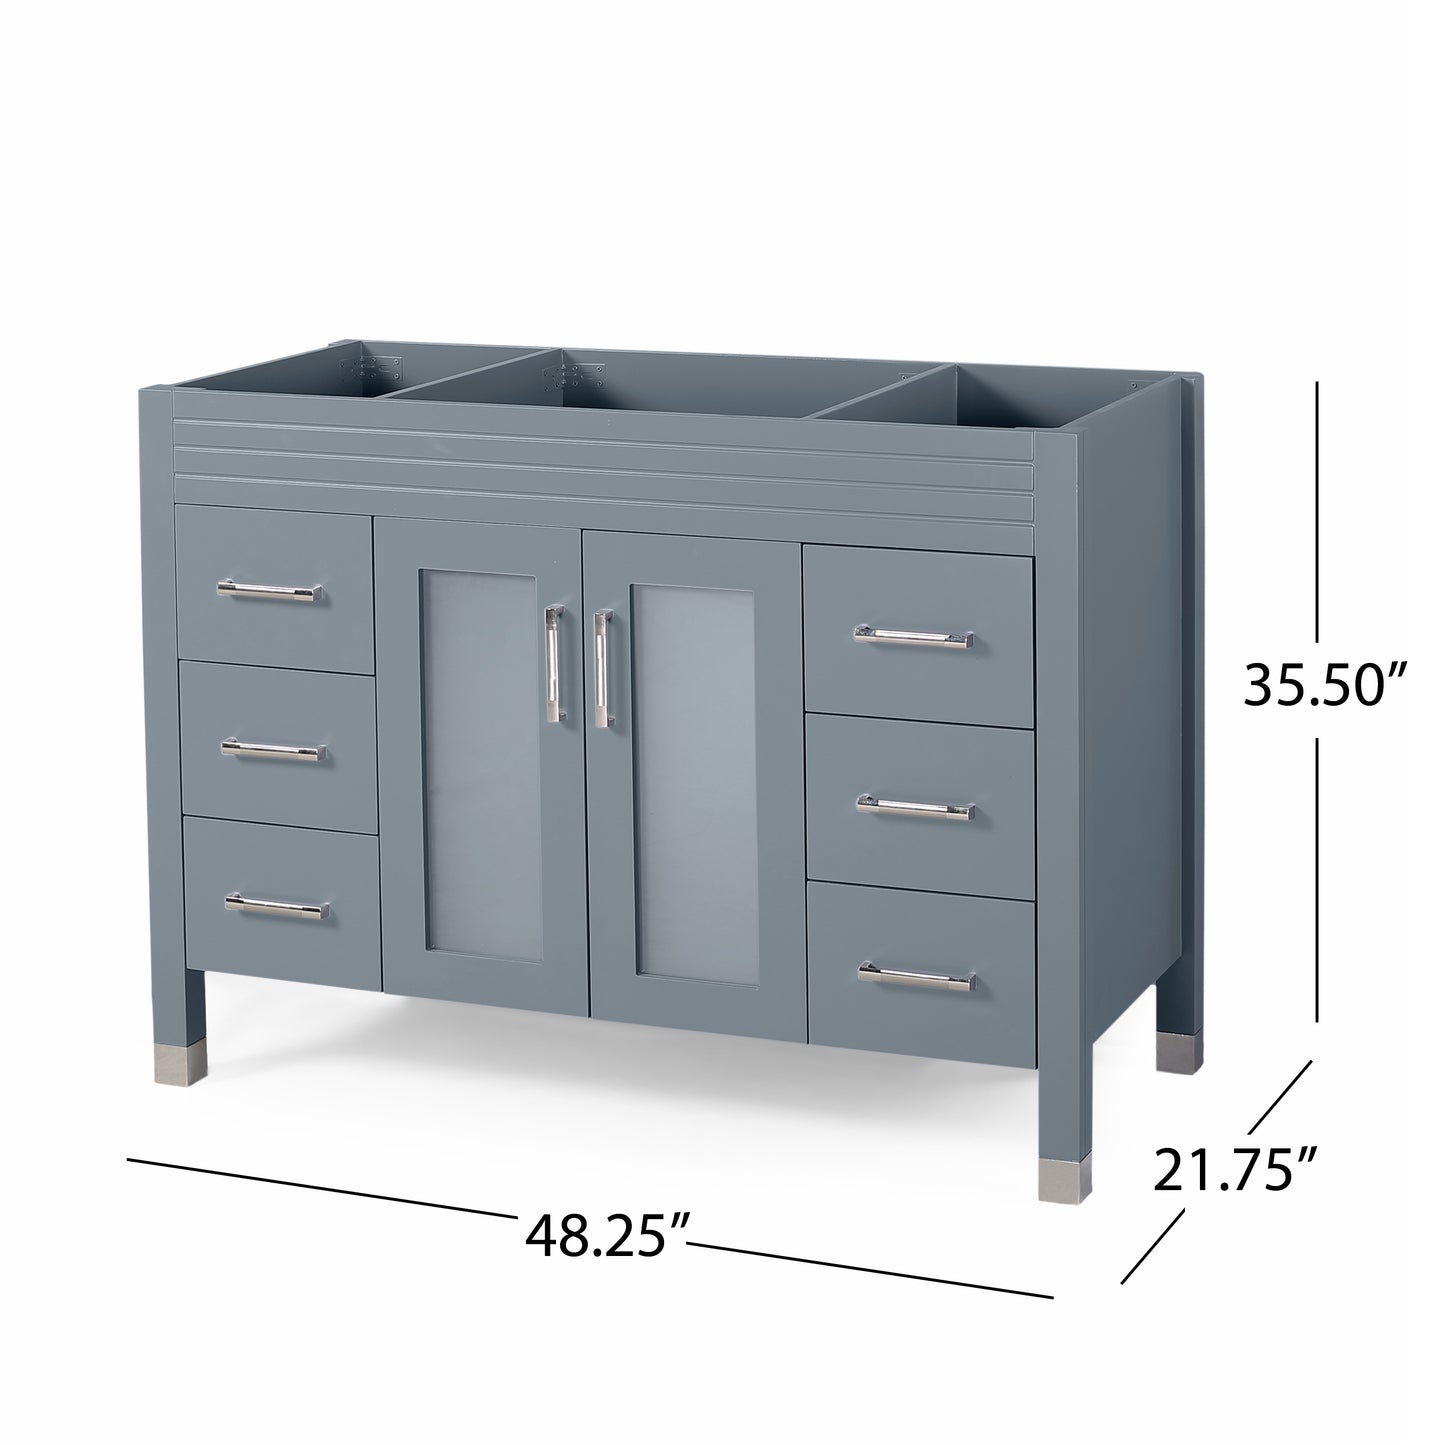 Holdame Contemporary 48" Wood Bathroom Vanity (Counter Top Not Included)